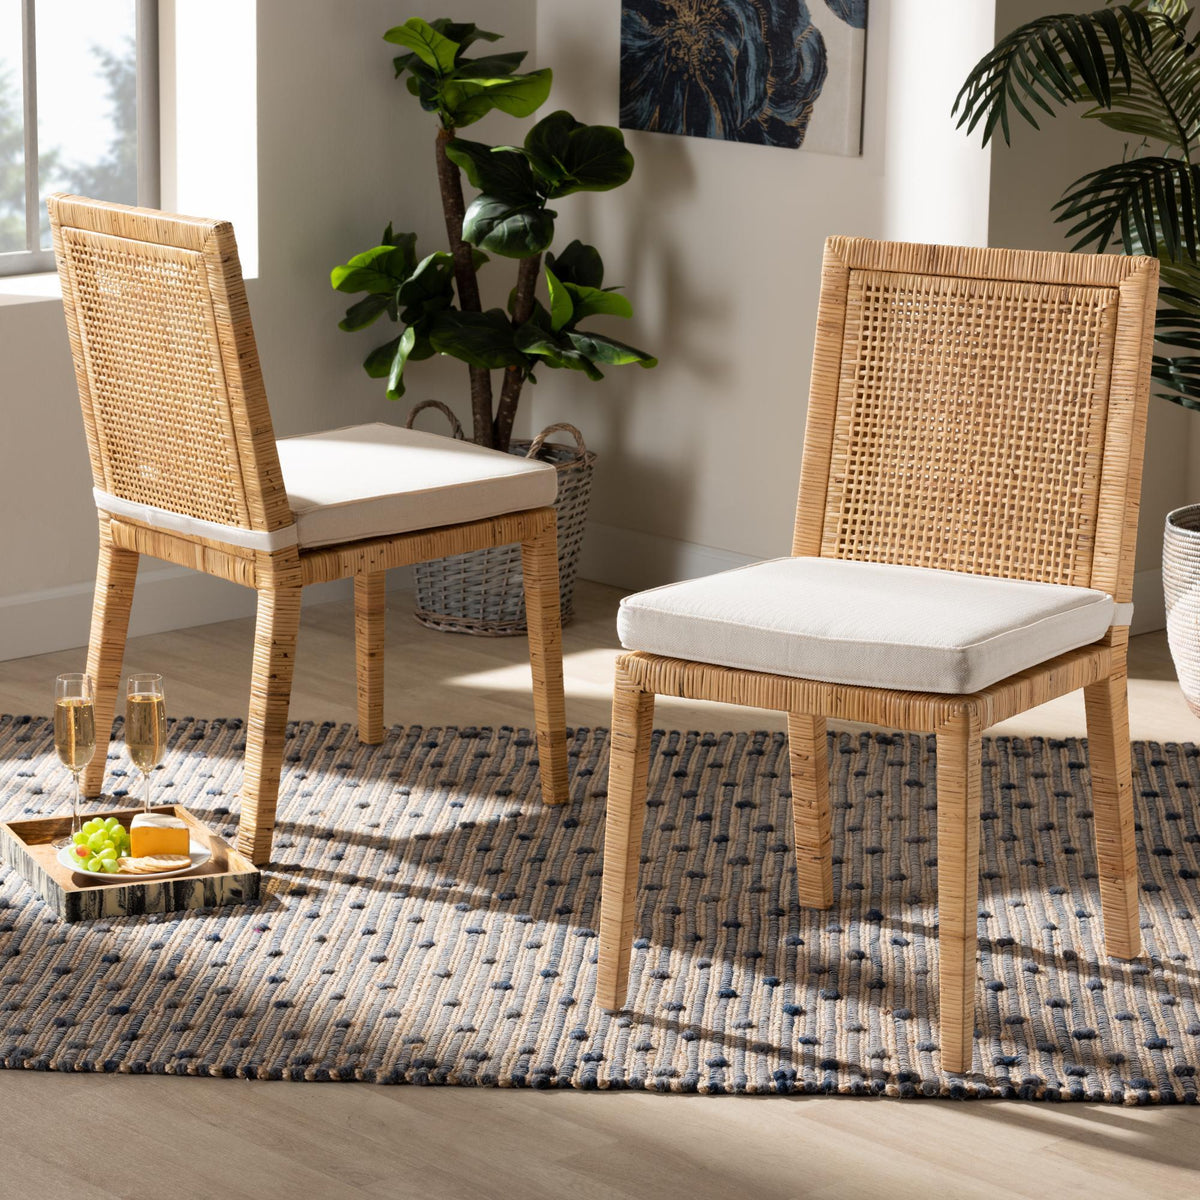 Baxton Studio Sofia Modern And Contemporary Natural Finished Wood And Rattan 2-Piece Dining Chair Set - Sofia-Natural-DC